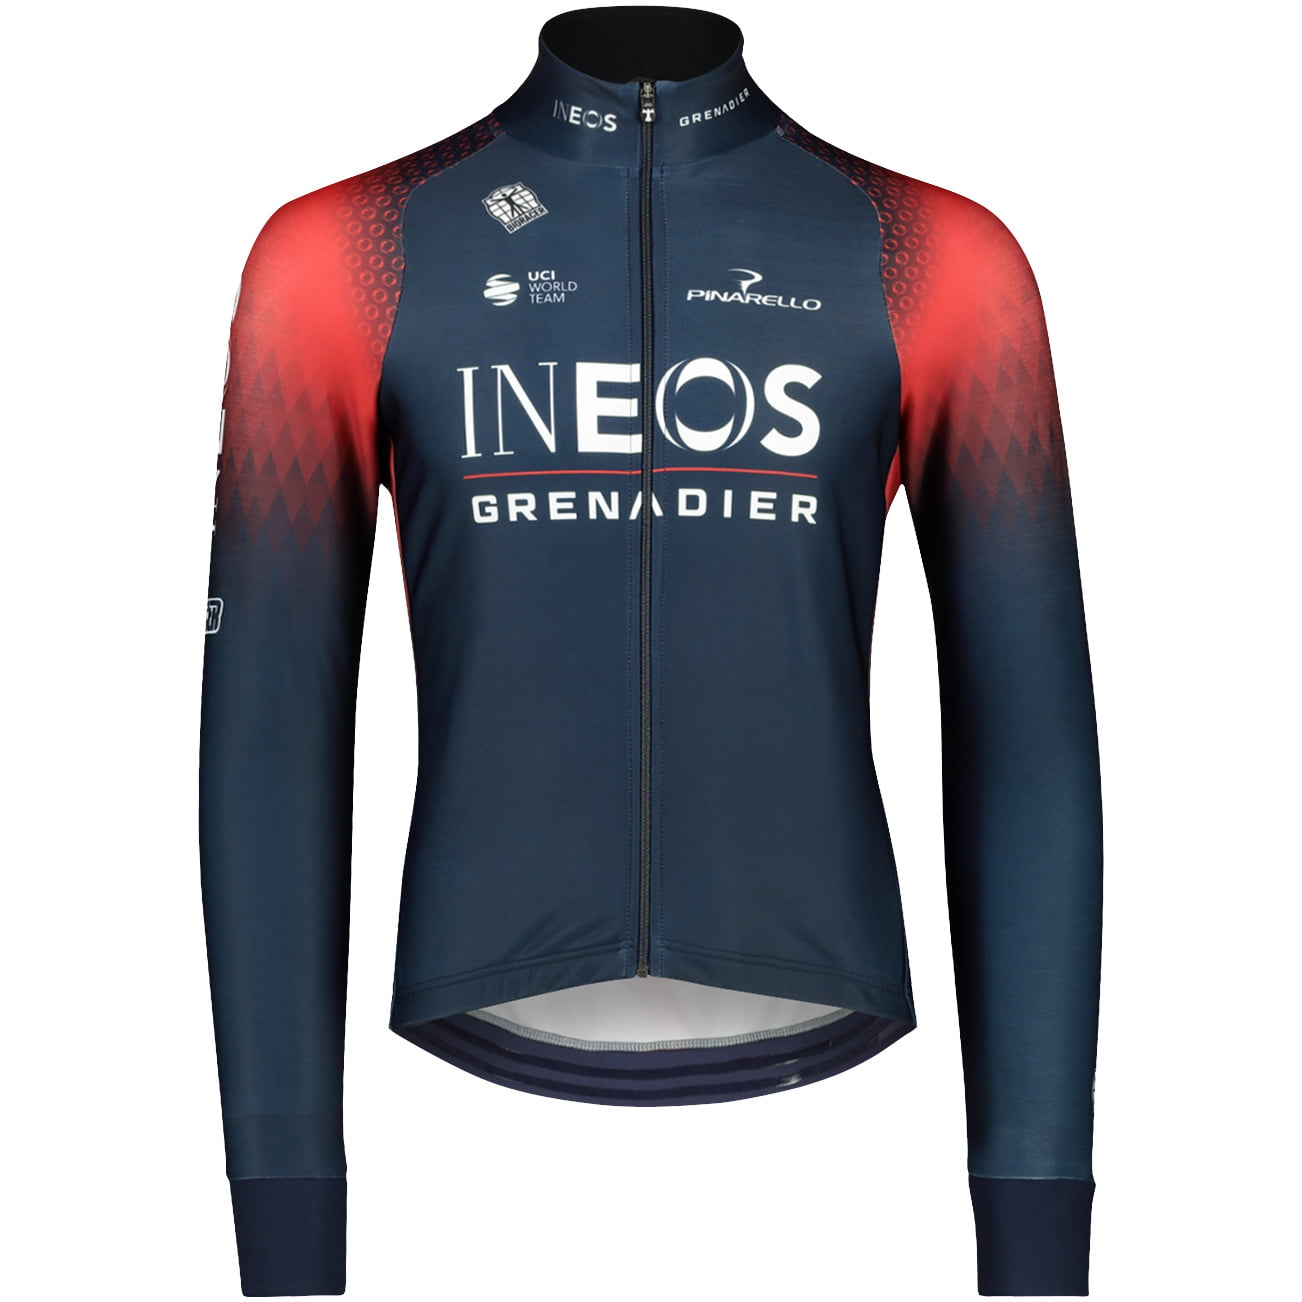 INEOS Grenadiers Jersey Jacket Icon Tempest 2022 Jersey / Jacket, for men, size 3XL, Winter jacket, Cycling clothes